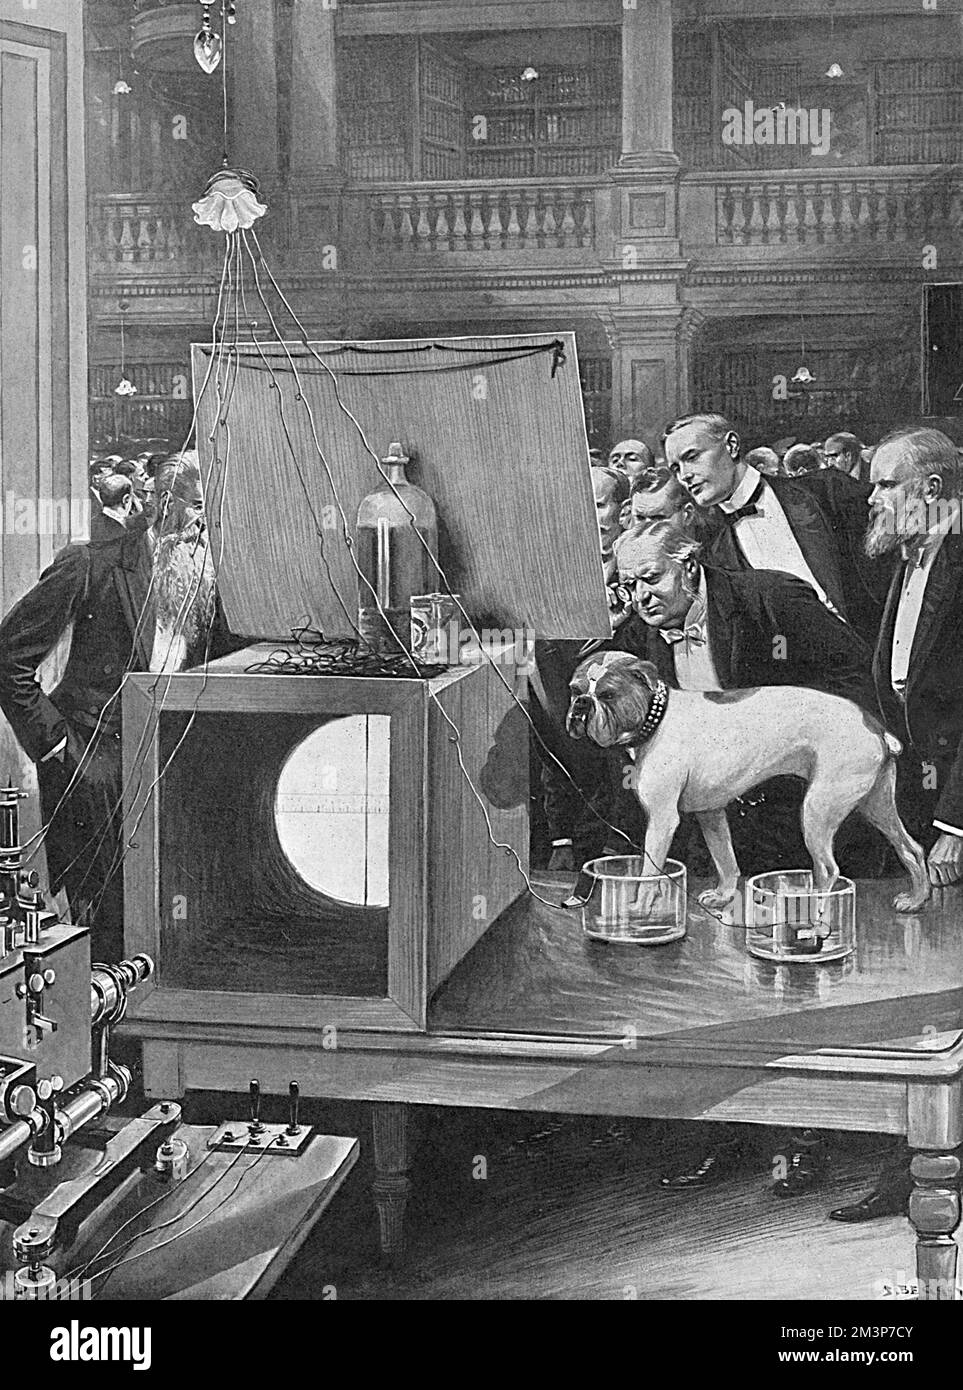 Jimmy, a Bulldog owned by Dr A.D.Waller, takes part in an experiment at the Royal Society, Burlington House, London. With one fore-leg and one hind-leg in separate pots of salt solution connected to Einthoven's string galvanometer, his heart-beat is recorded on a lime-lit sheet, a thread vibrating with each heart-beat. Several ladies in the audience also took part in the experiment, dipping their hands into the saline solution pots, and their hearts were found to be steadier than Jimmy's.     Date: May 1909 Stock Photo